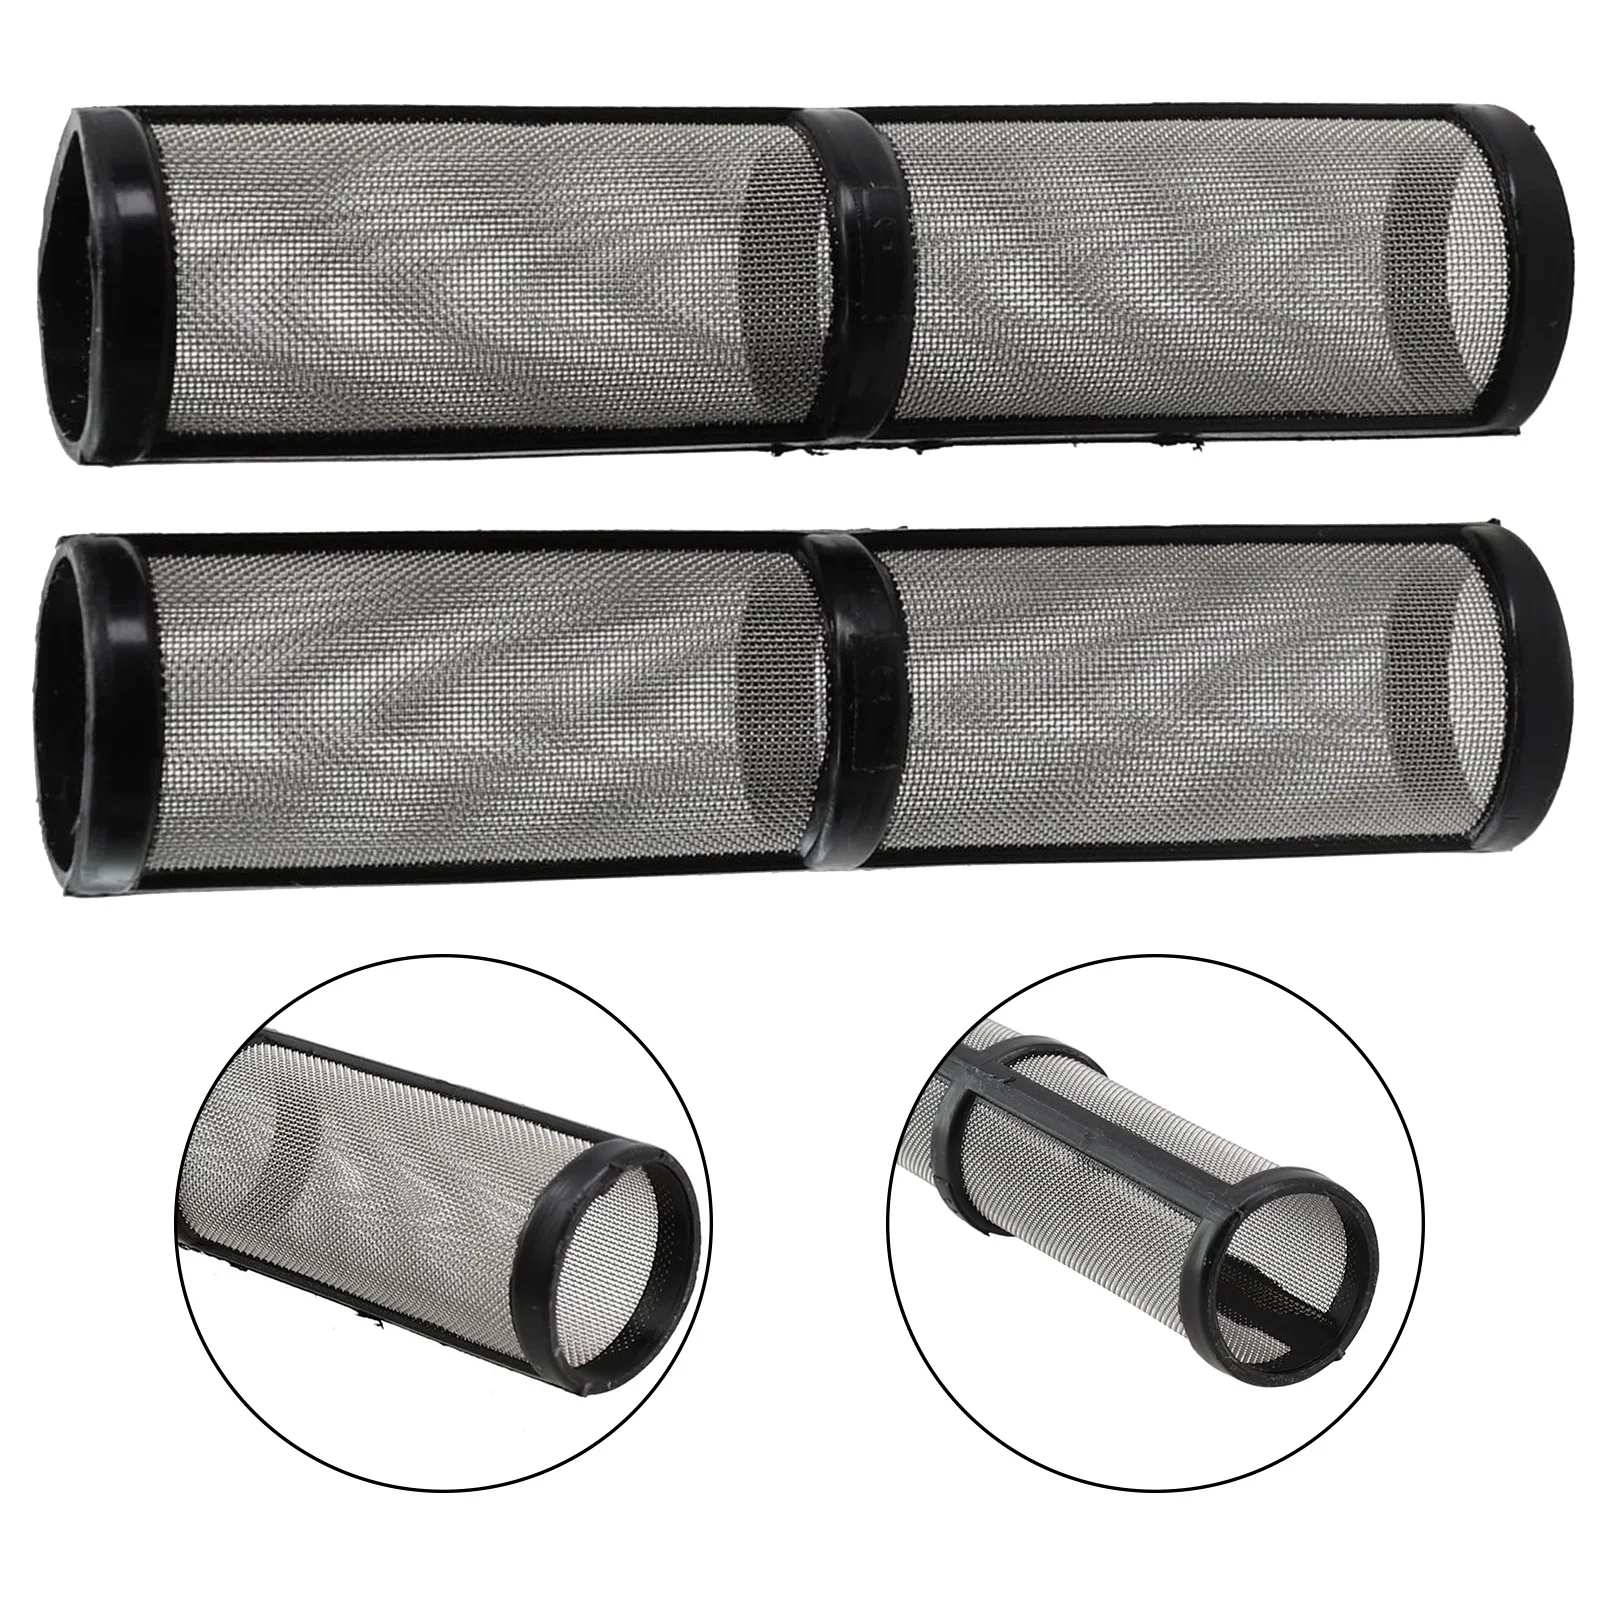 Efficiently Filter Coating Materials with 2pcs Mesh Airless Electric Paint Sprayer Filters for G390 G395 G495 G595 filter pump body coating stainless steel 2pcs 395 495 electric filter for g390 mesh airless paint sprayer black